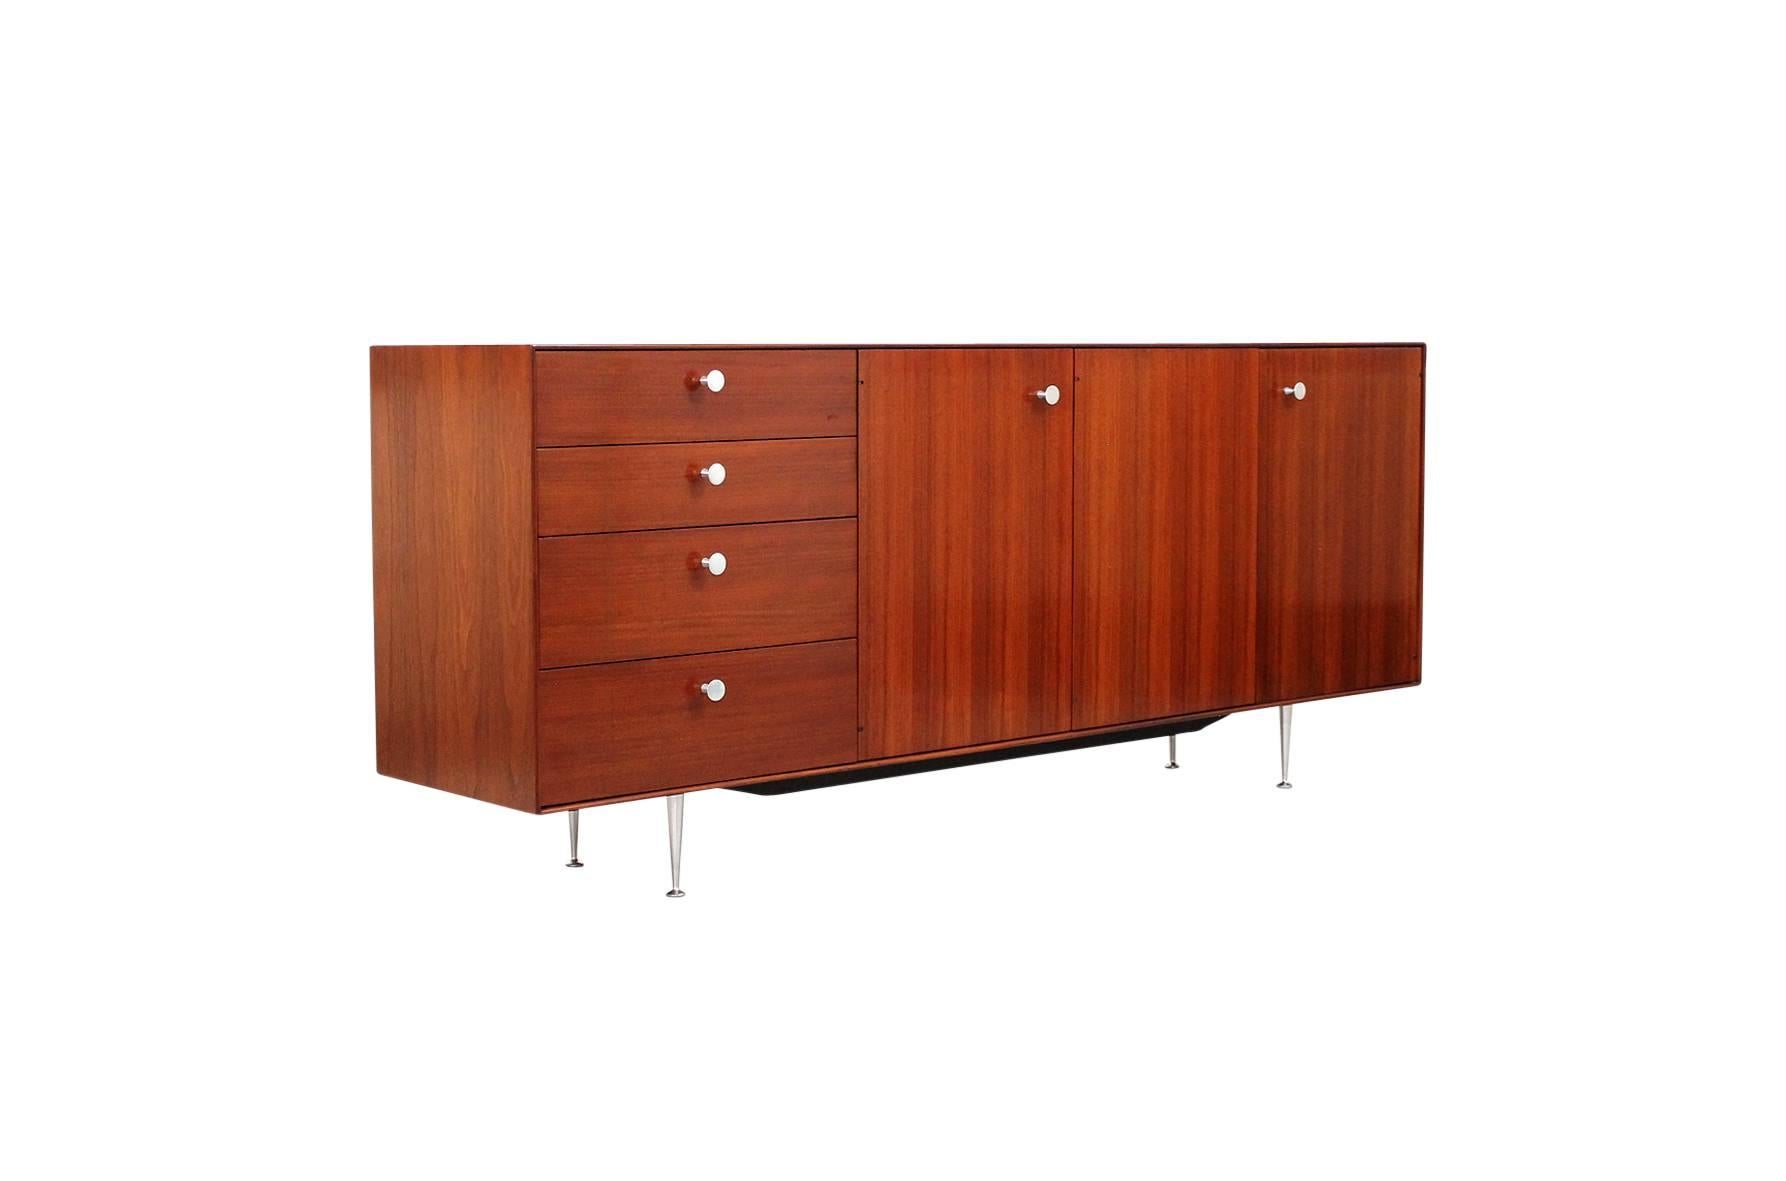 Walnut thin edge cabinet designed by George Nelson for Herman Miller. This is an early example of the series dating from circa 1960. It features four drawers and three doors, an interior cork lined drawer, and steel pulls and legs.
 